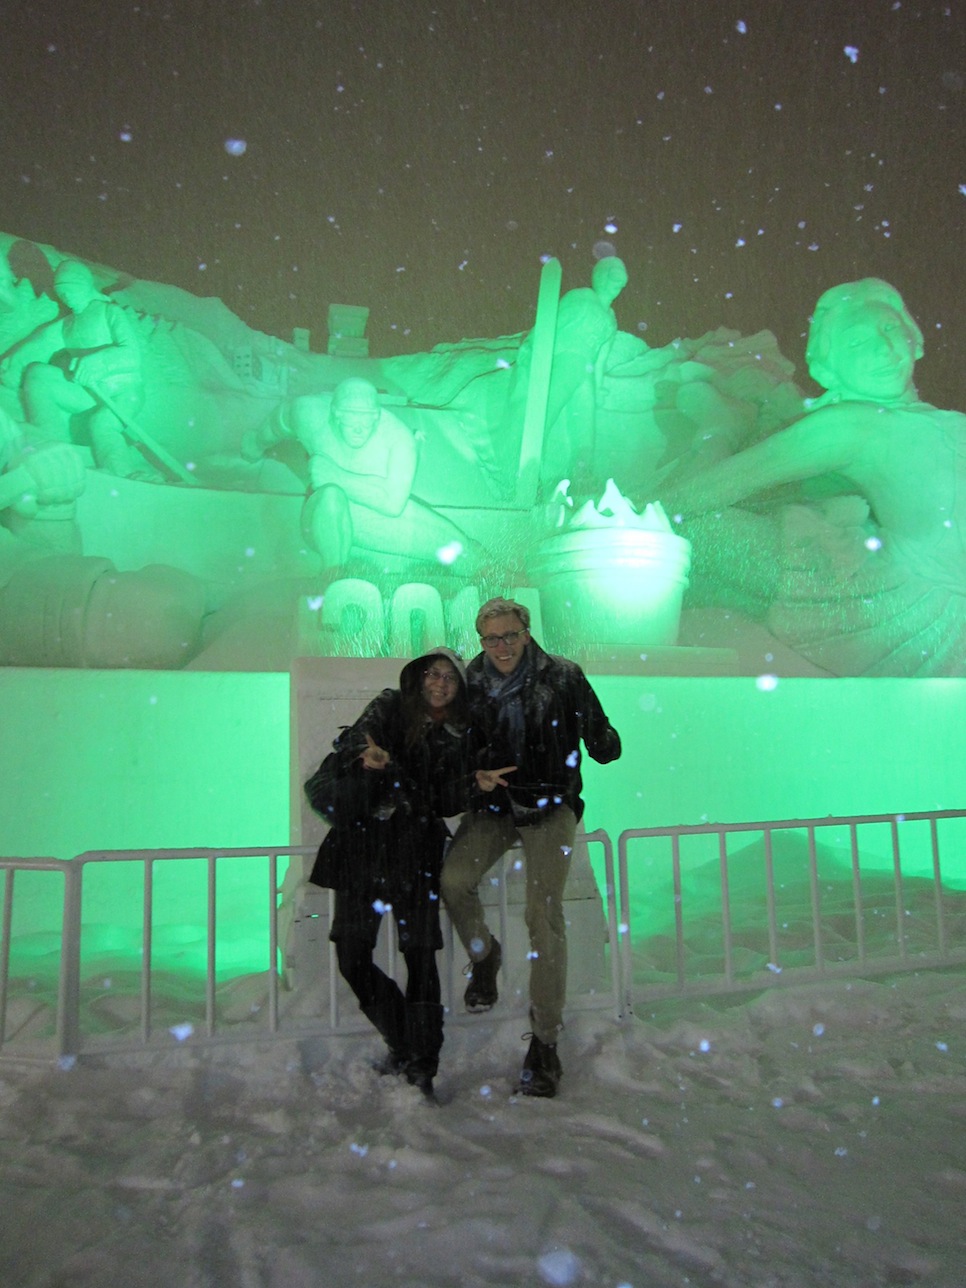 POSING IN FRONT OF THE SOCHI OLYMPICS SCULPTURE WITH EMI